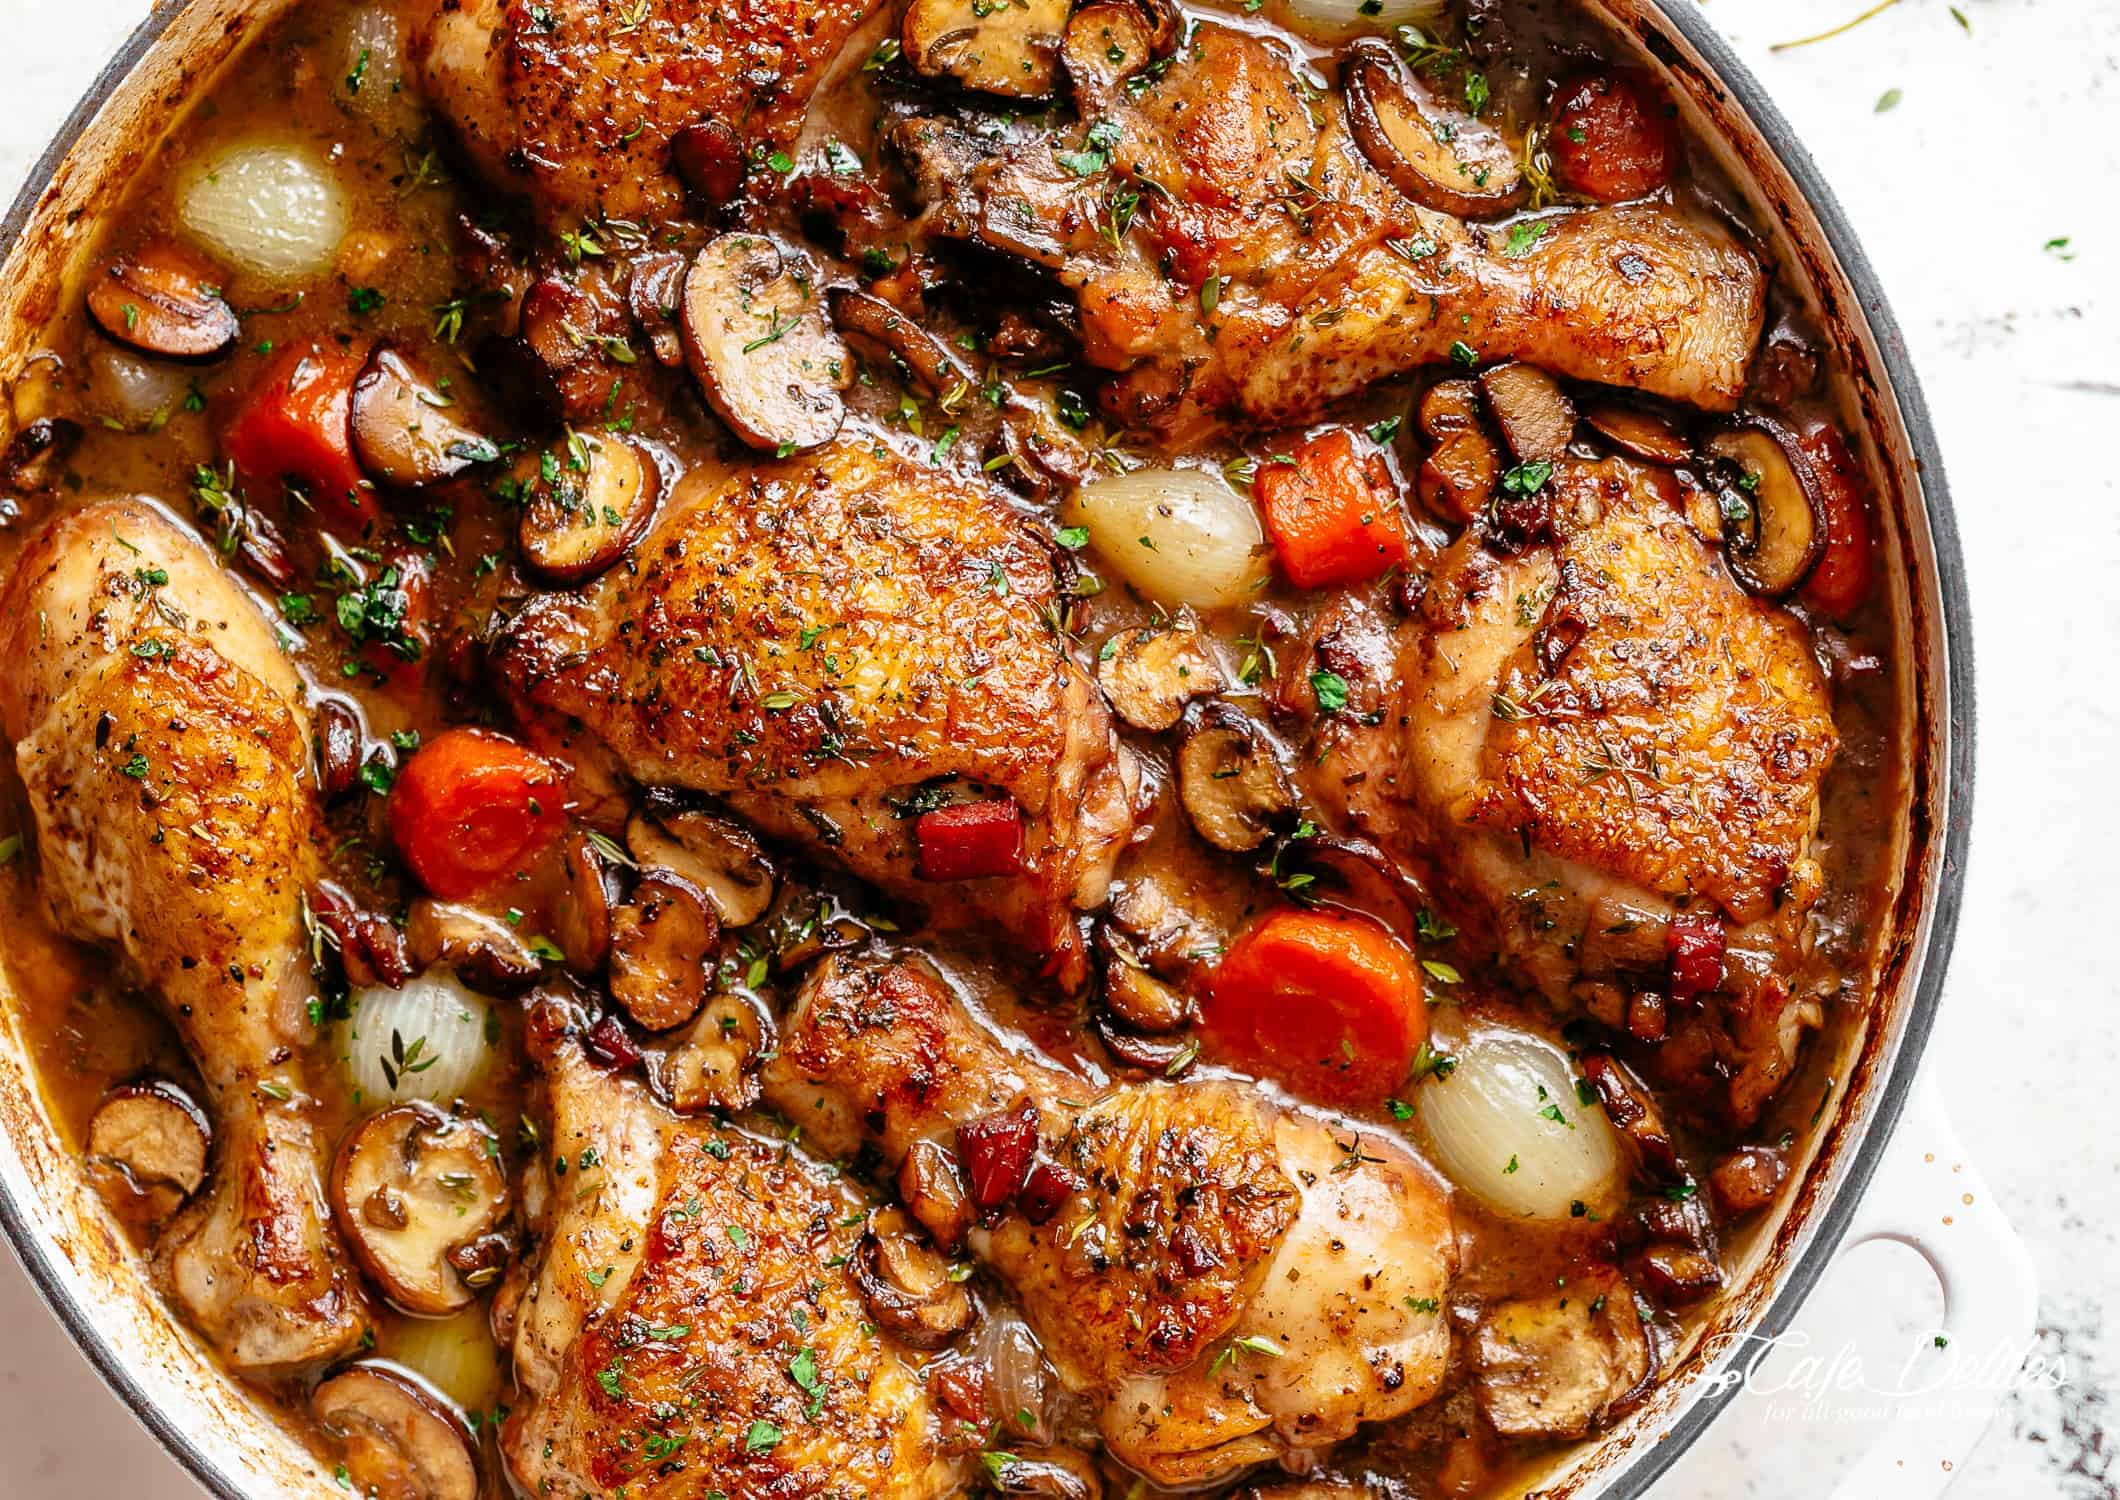 Coq Au Vin is the most delicious chicken recipe is ready on the table!